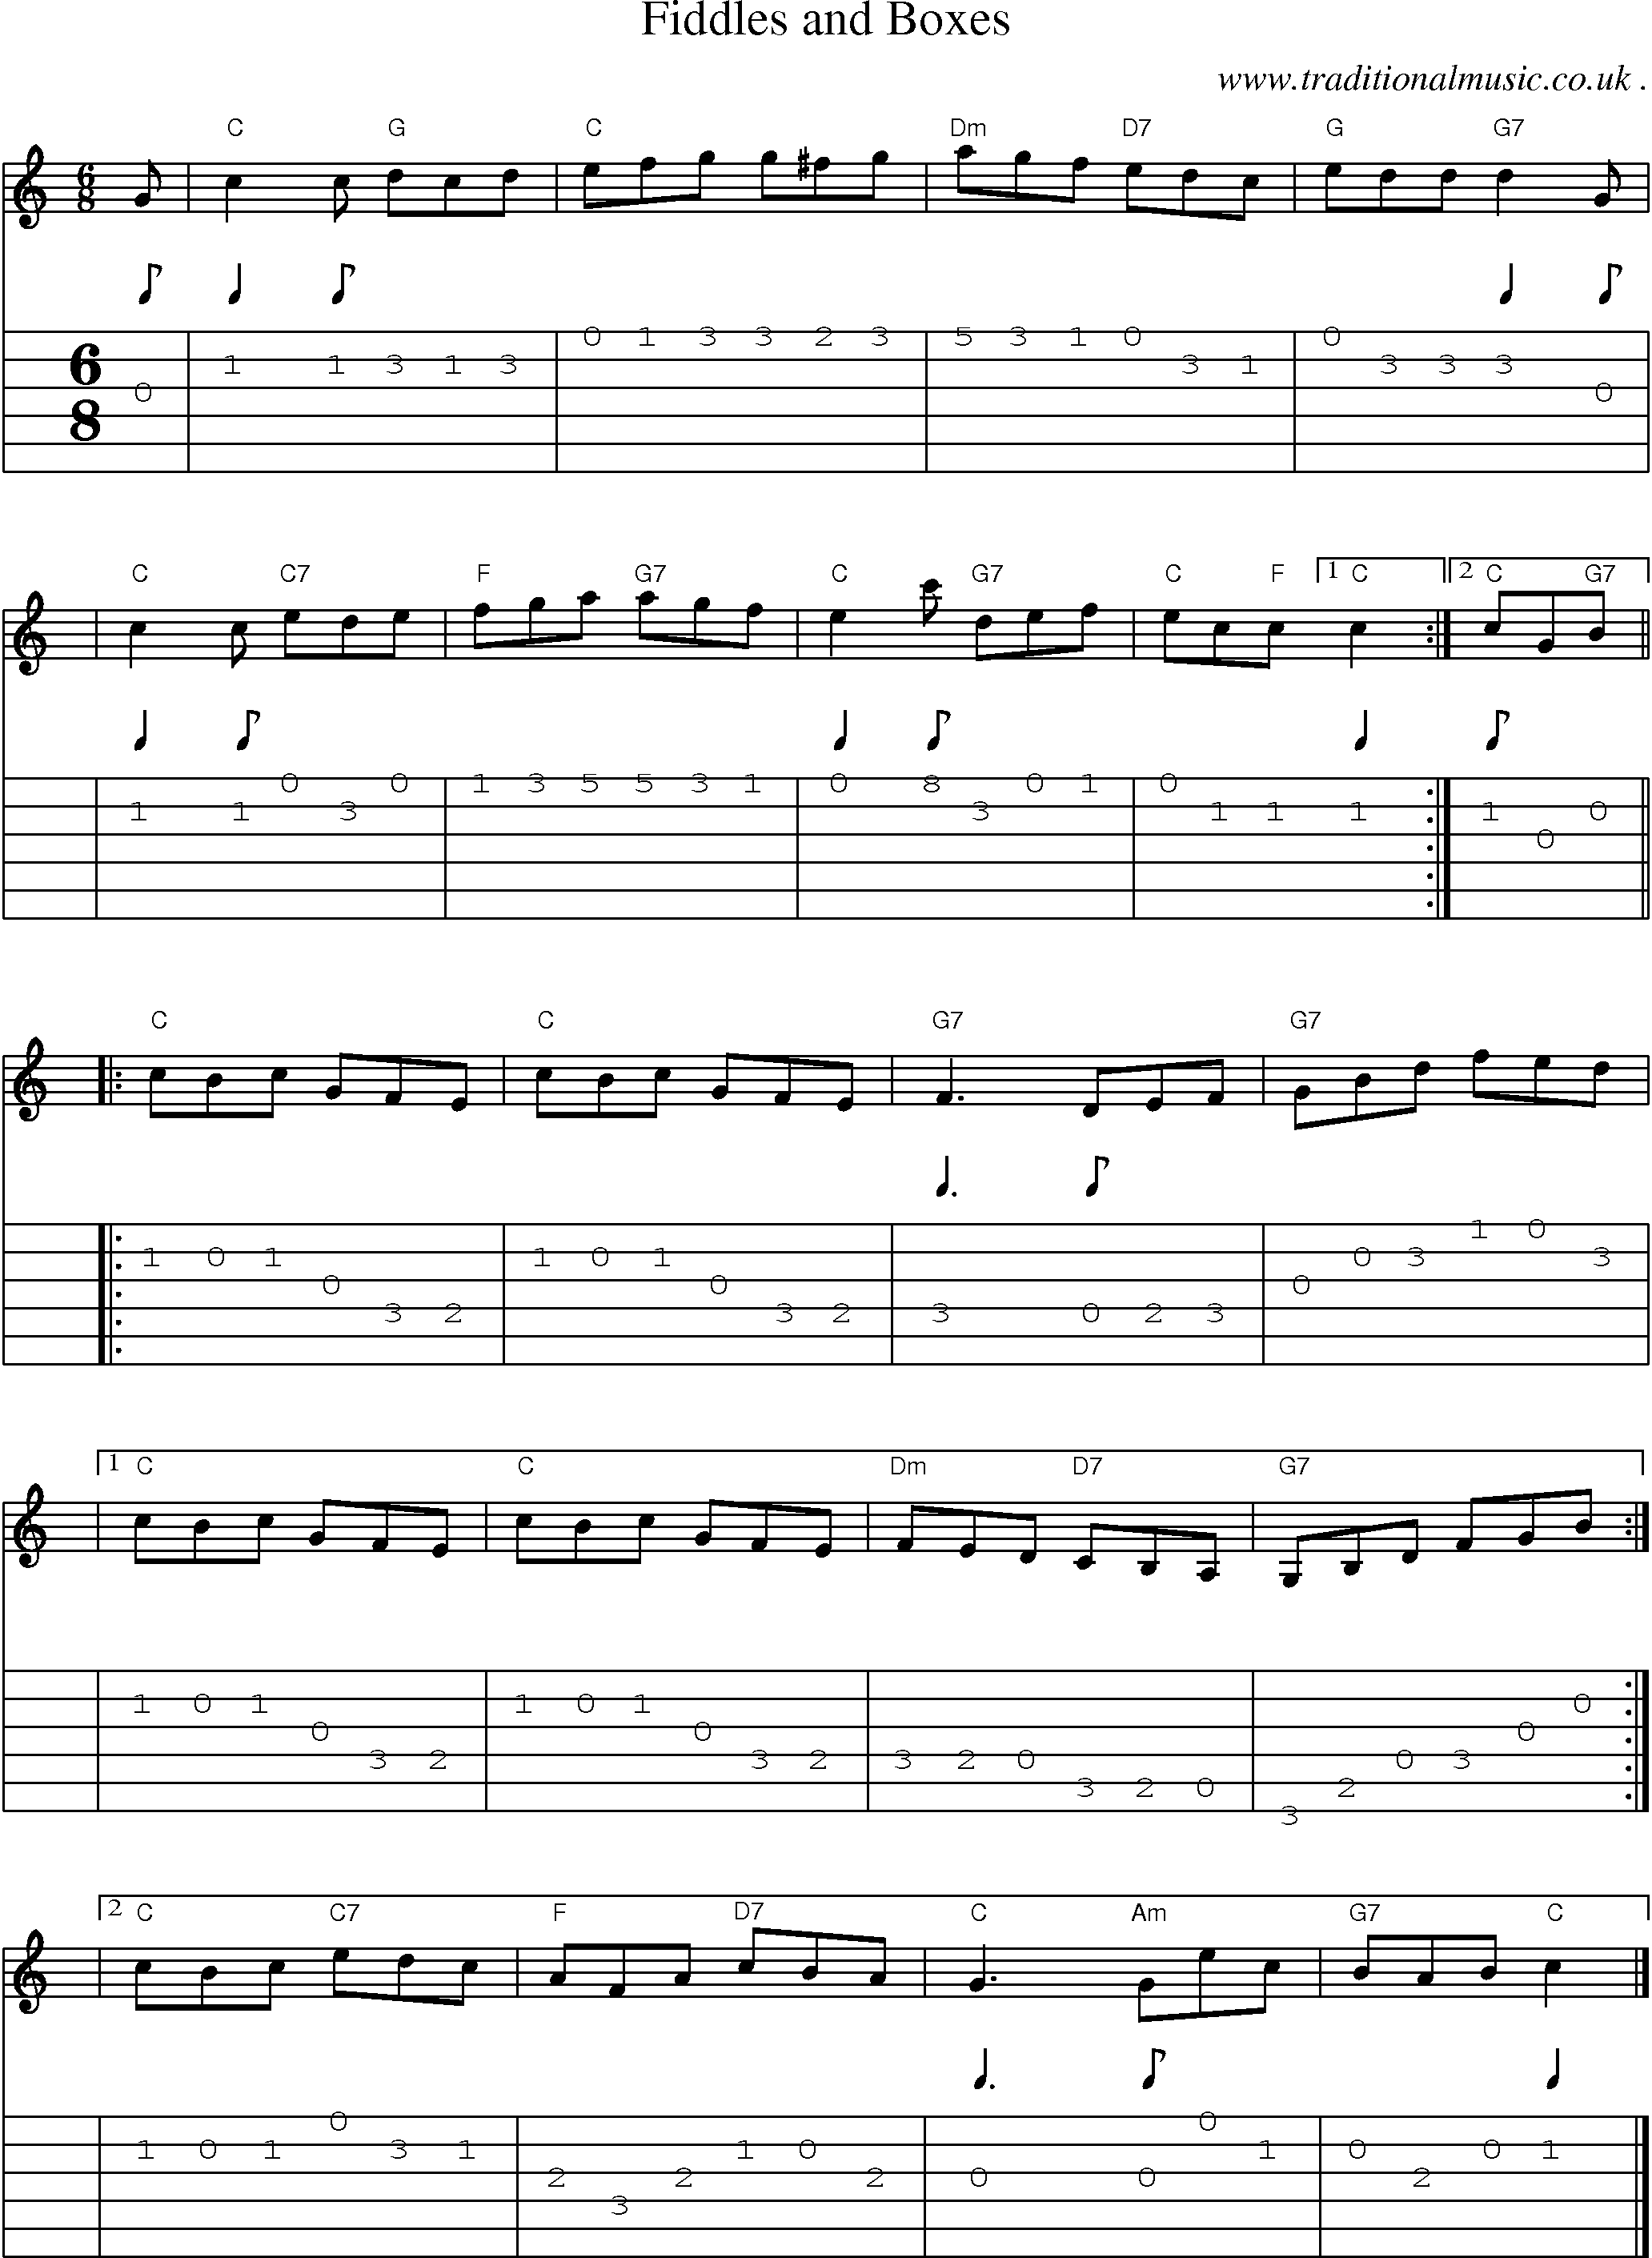 Sheet-music  score, Chords and Guitar Tabs for Fiddles And Boxes